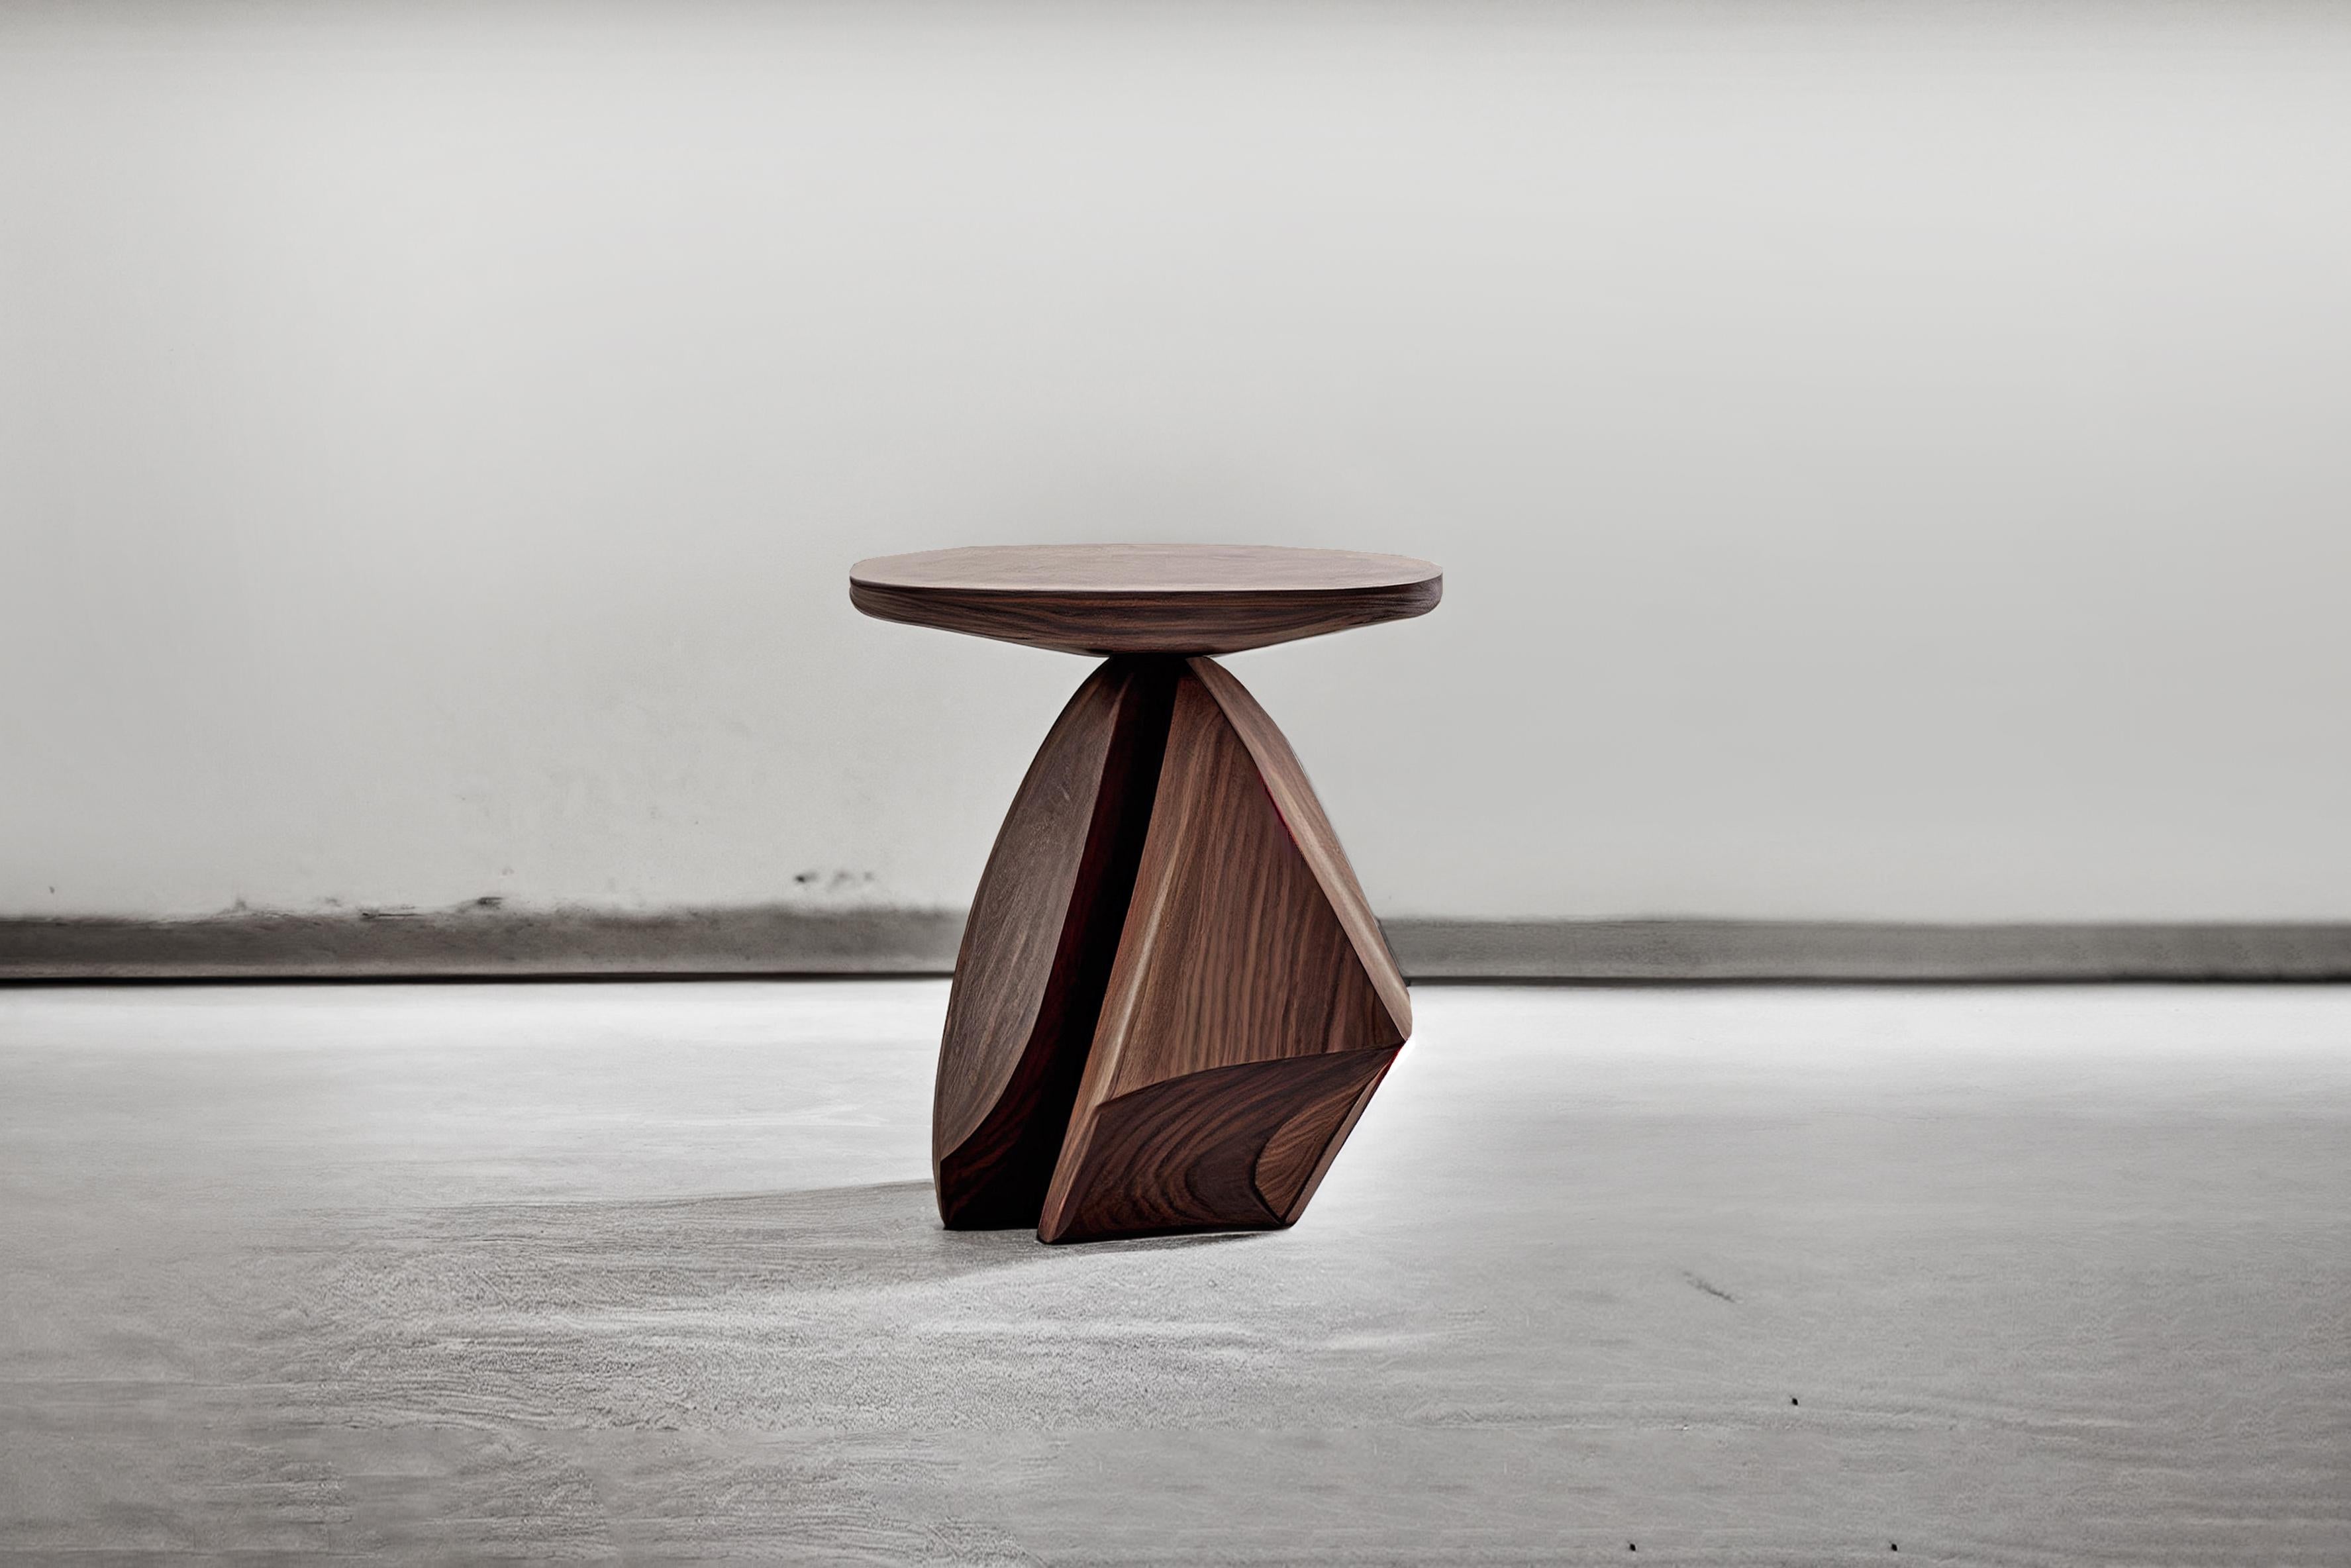 Sculptural side table made of solid walnut wood, nightstand, auxiliary table solace S6 by Joel Escalona

The Solace side table series, designed by Joel Escalona, is a furniture collection that exudes balance and presence, thanks to its sensuous,